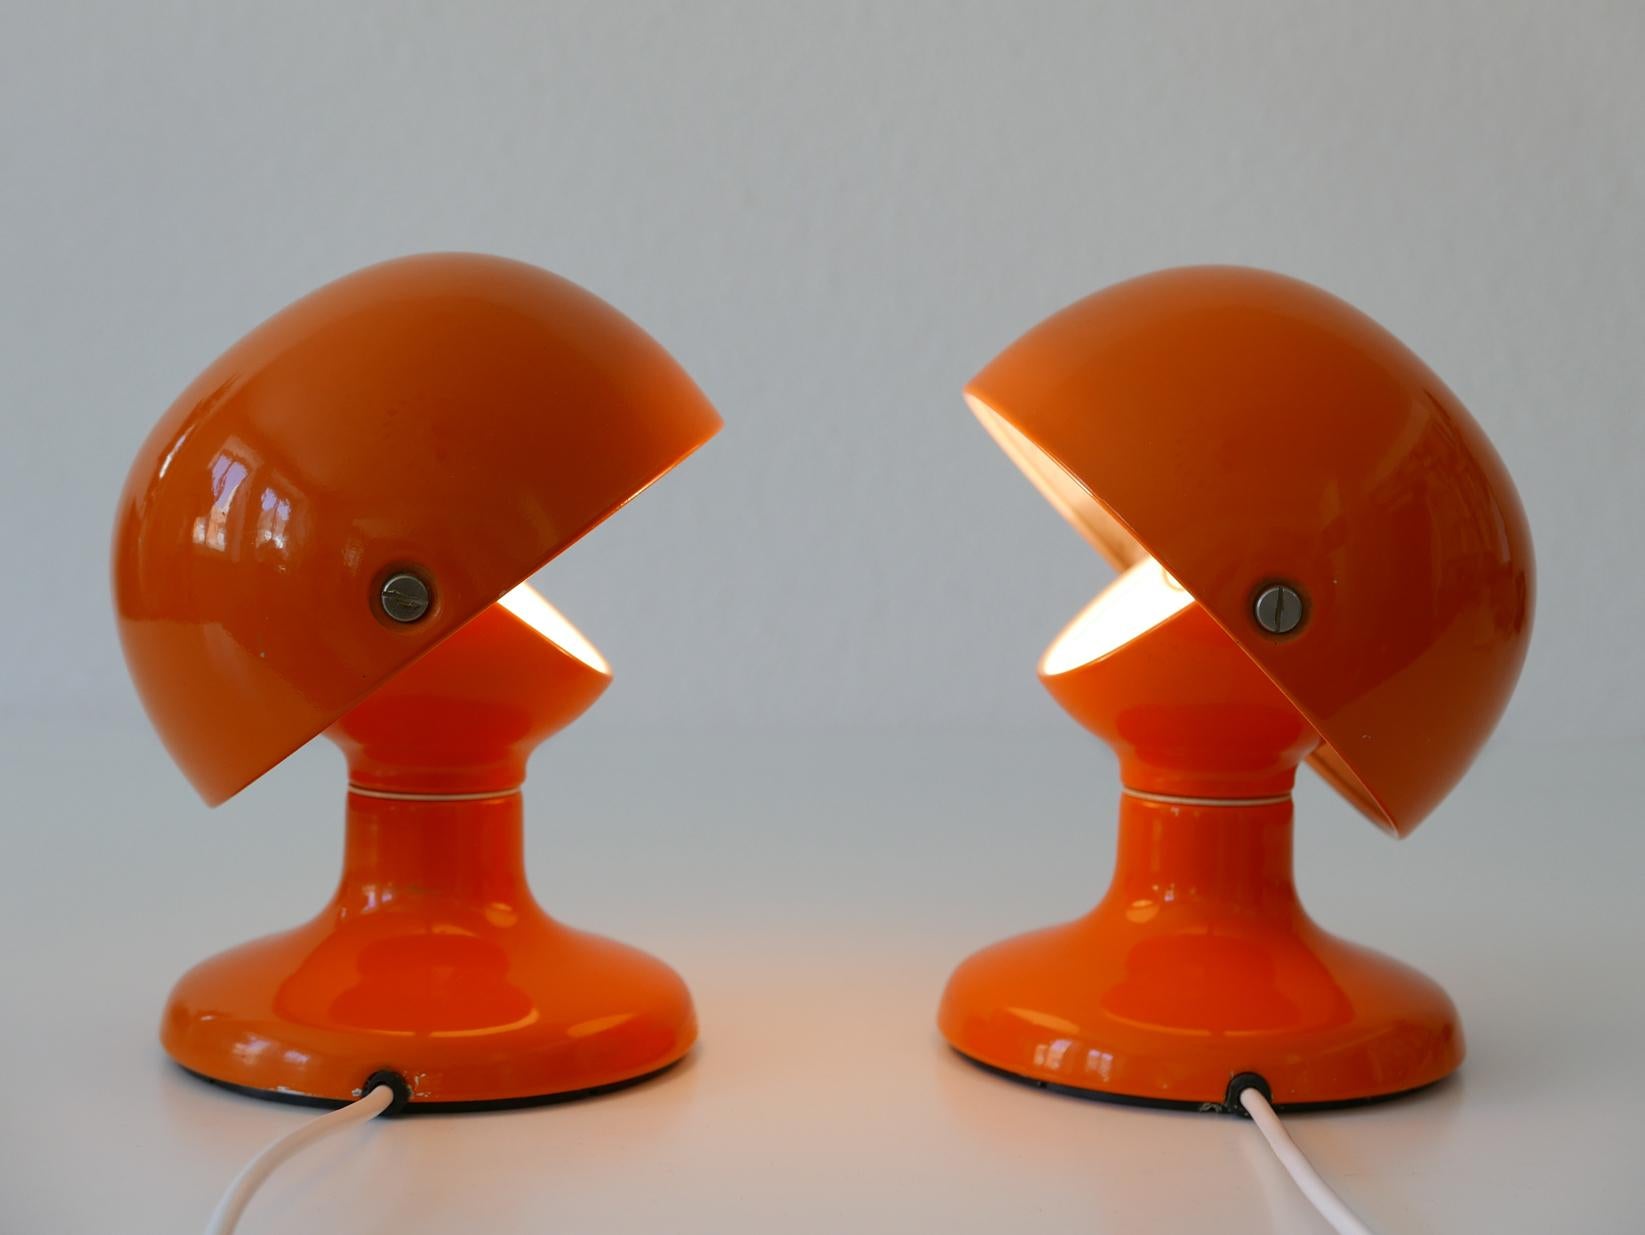 Italian Pair of Mid-Century Modern Jucker Table Lamps by Afra & Tobia Scarpa, 1960s For Sale